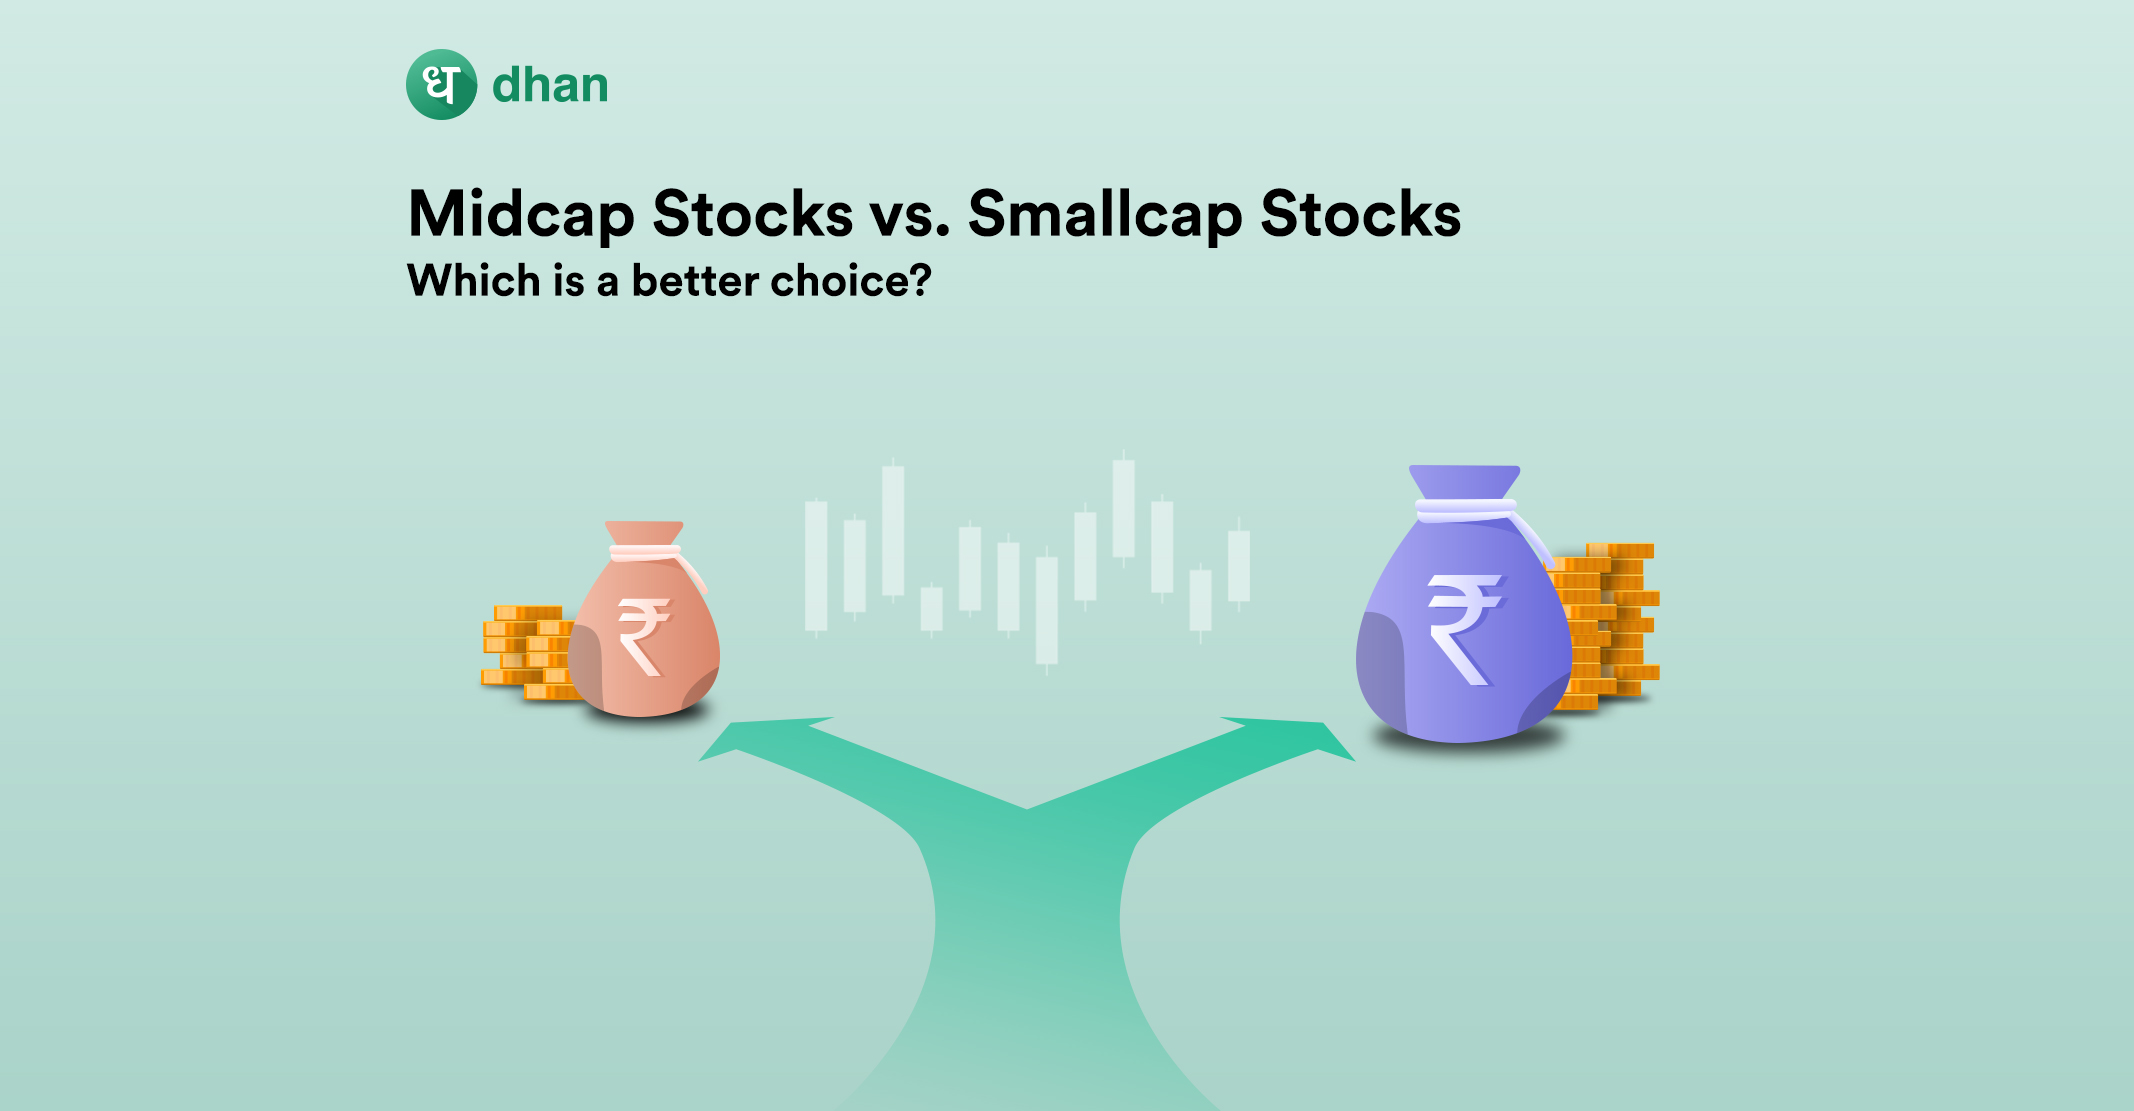 Midcap Stocks vs Smallcap Stocks - Which is a Better Choice?